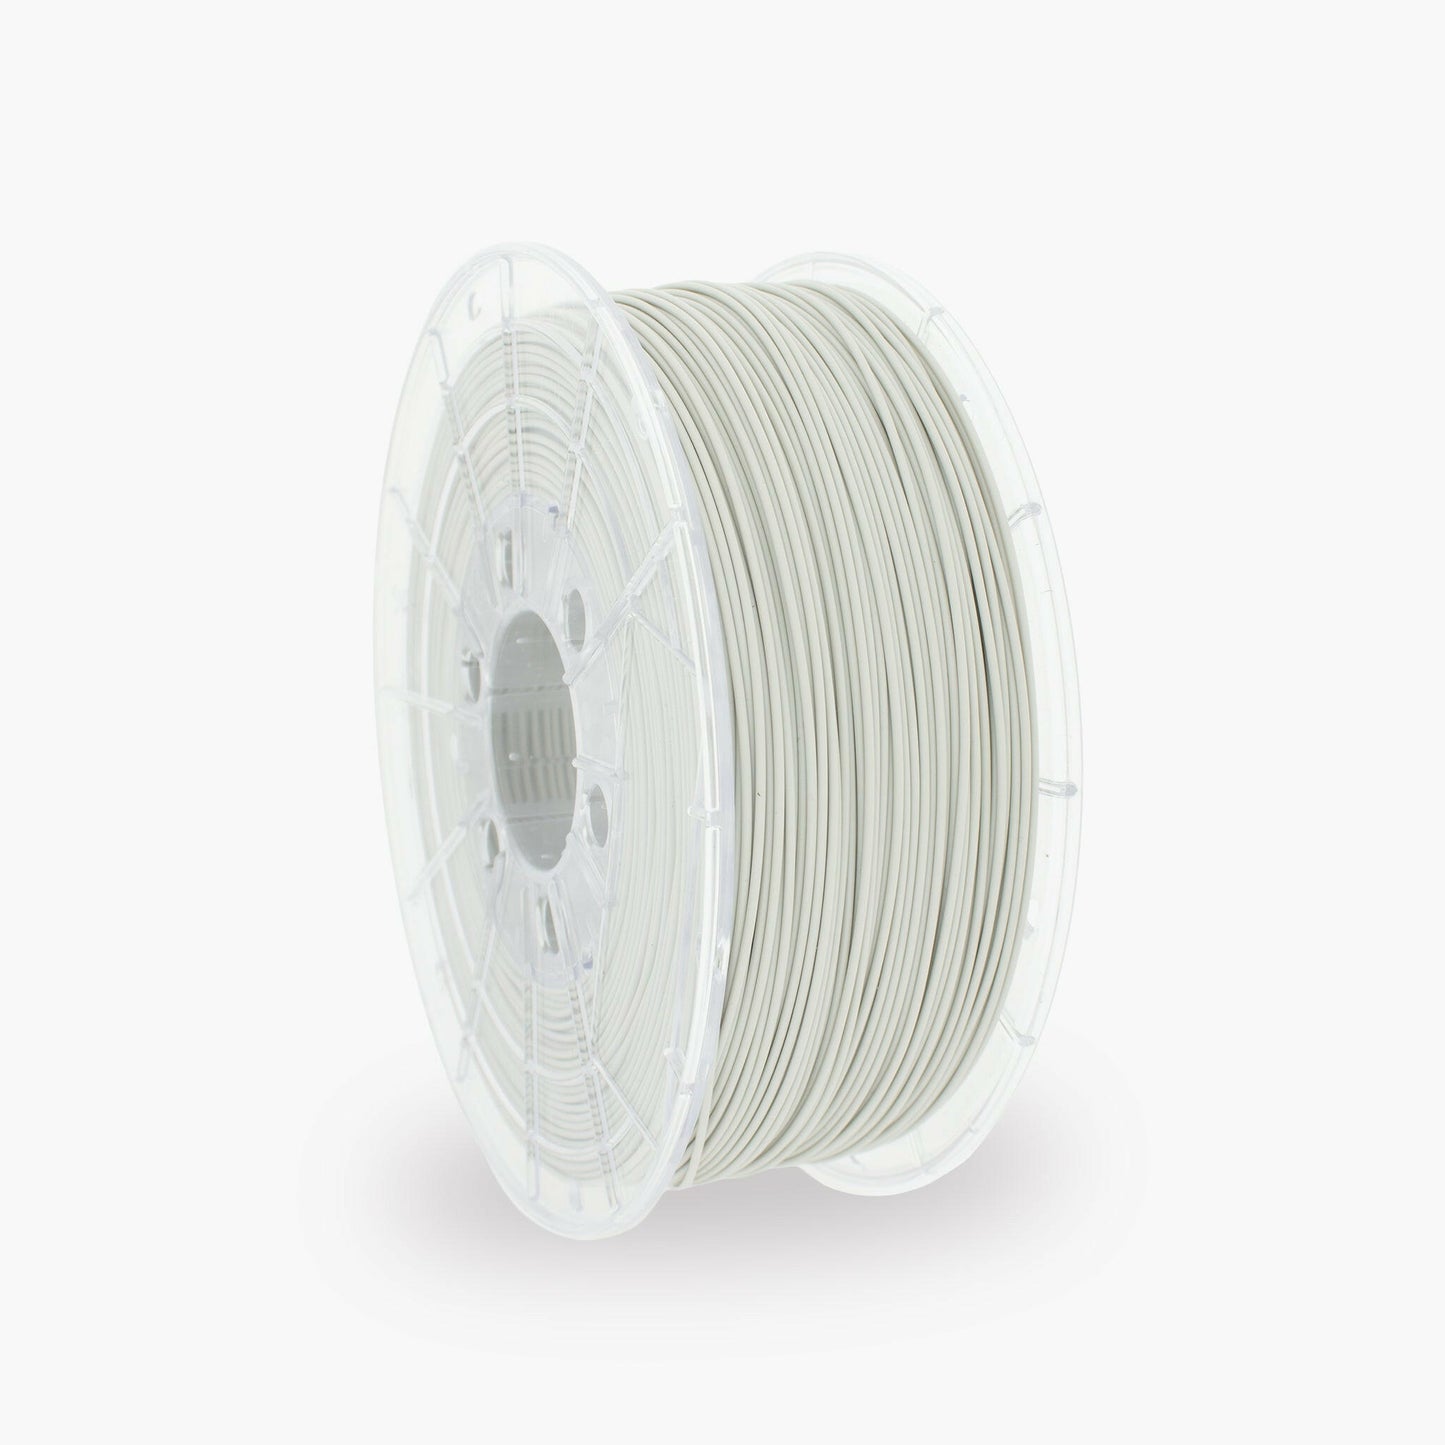 Light Grey PLA 3D Printer Filament with a diameter of 1.75mm on a 1KG Spool.